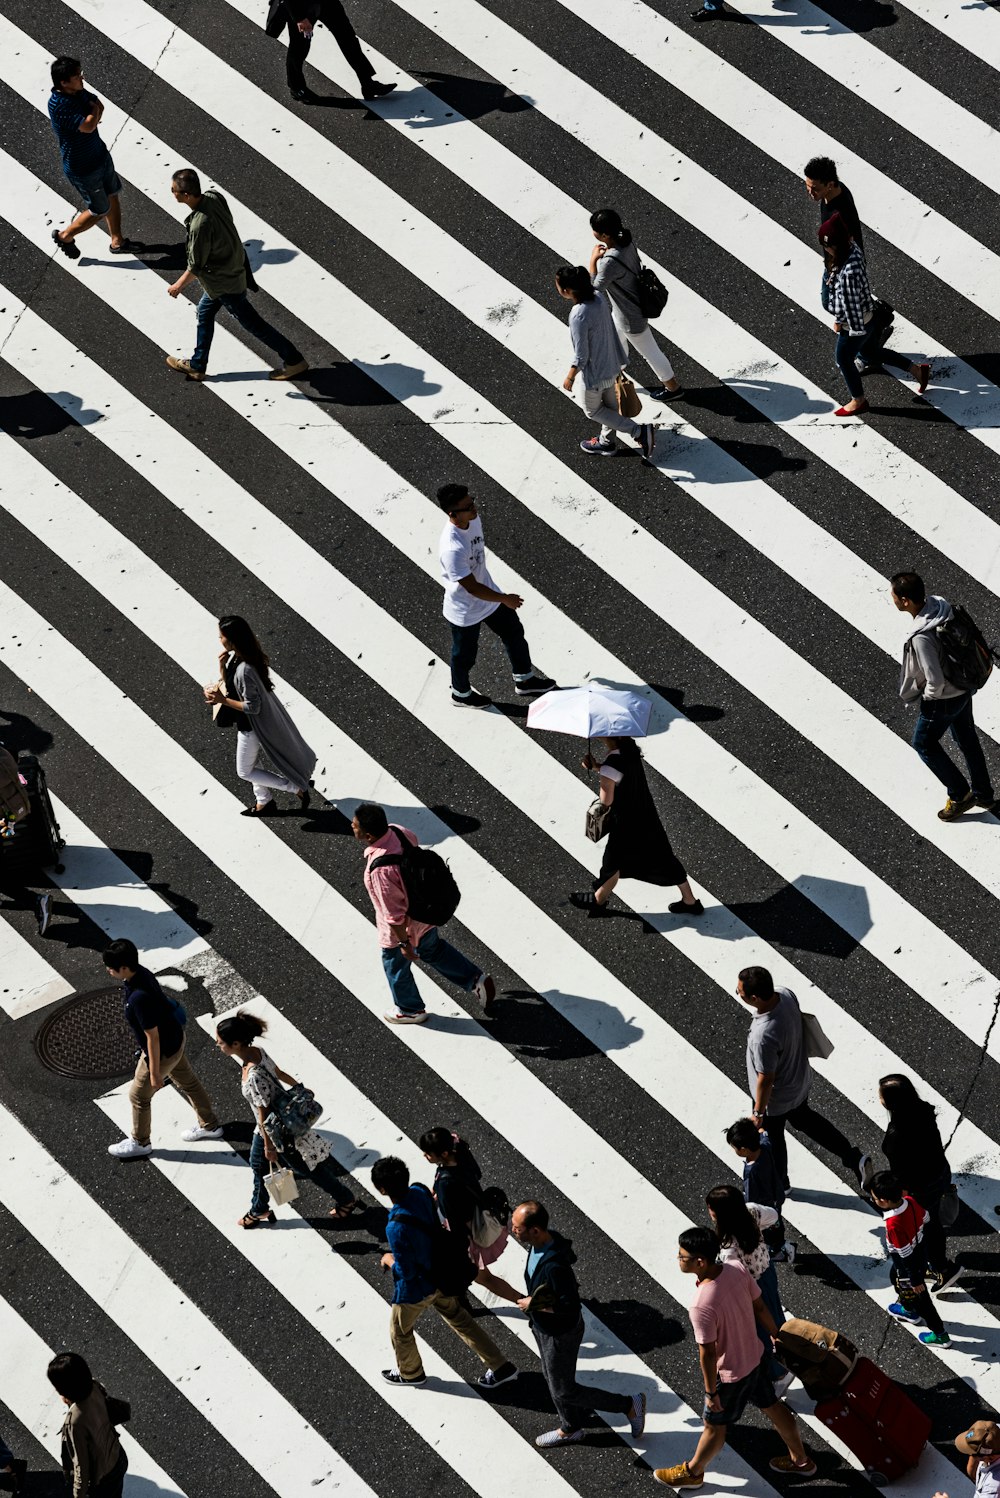 Crossing Road Pictures  Download Free Images on Unsplash